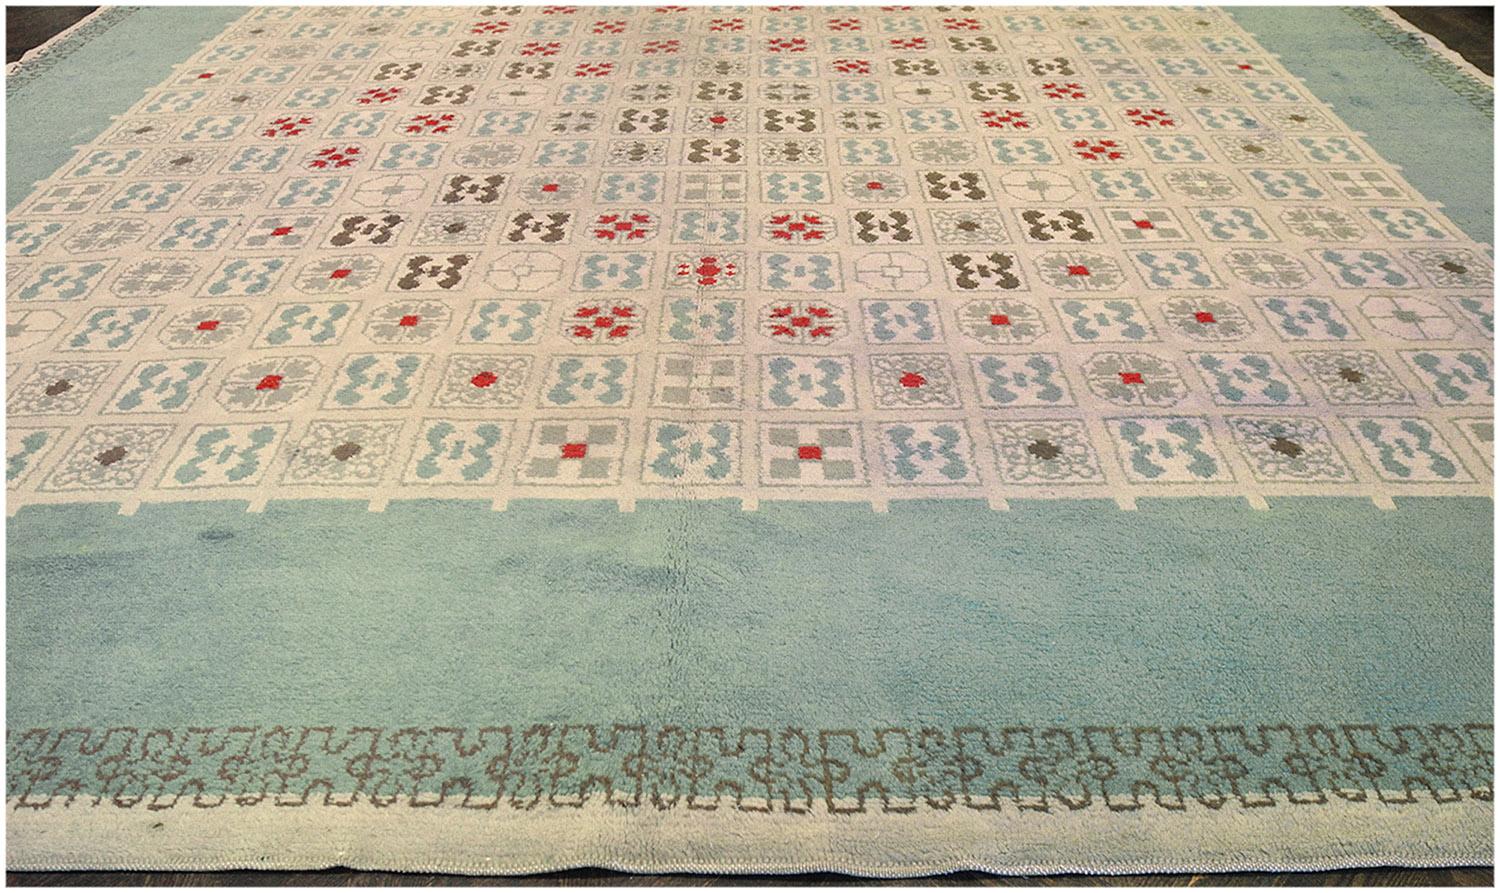 This traditional handwoven French Leleu deco rug has an overall eu-de-nil field with a profusion of delicate tiles checkered with alternating geometric icons, in a majestic turquoise green border with a complementary outlined geometric stripe